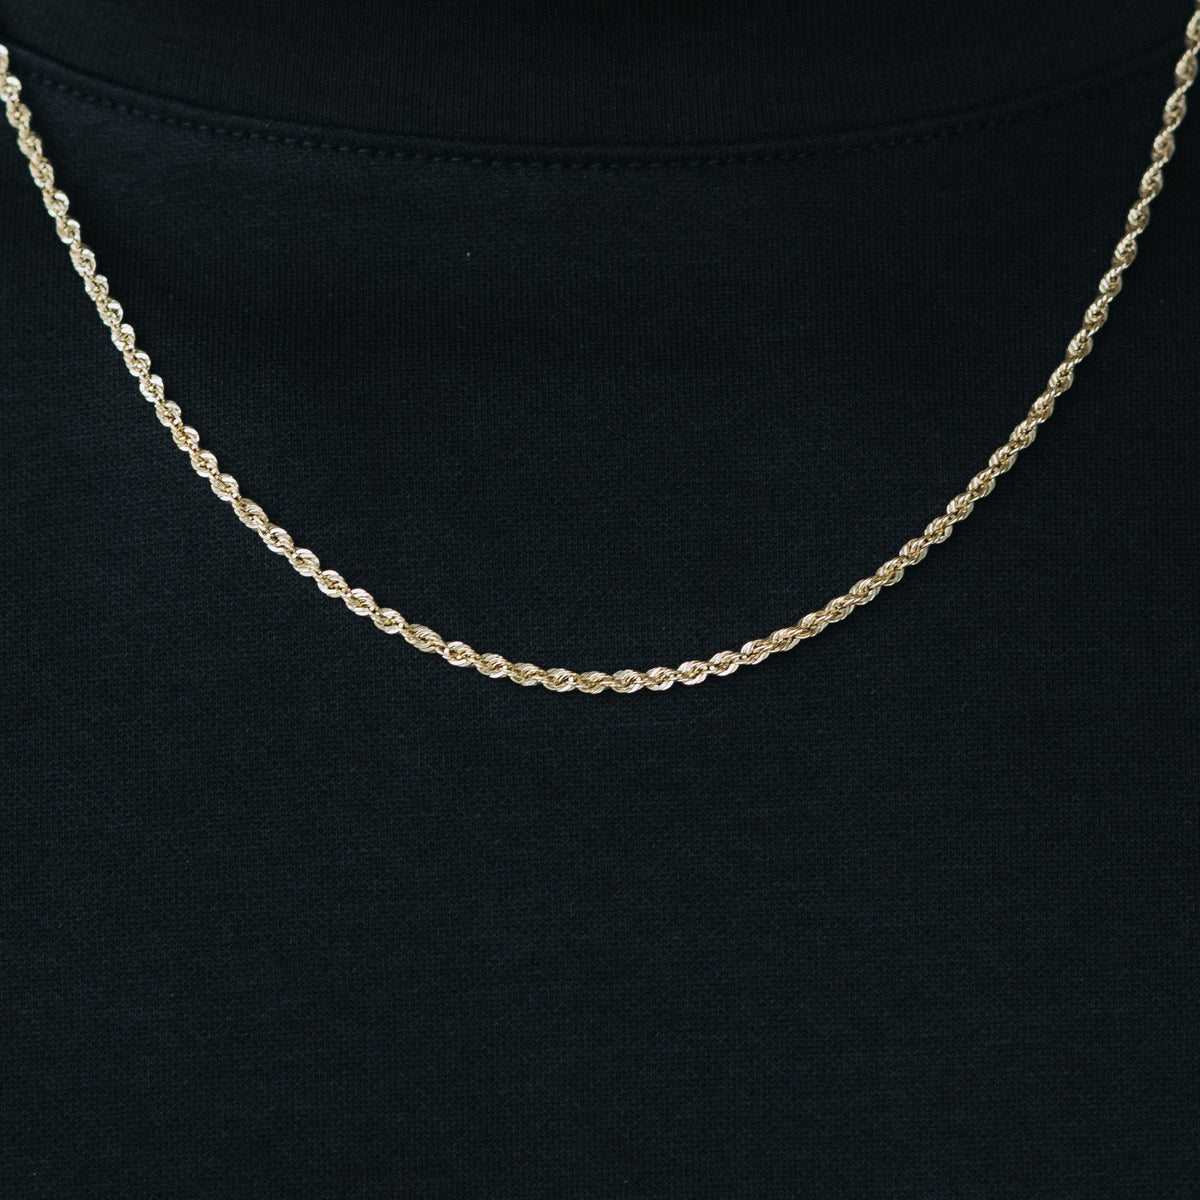 10k Solid Gold Rope Chain 2mm - 6 ICE